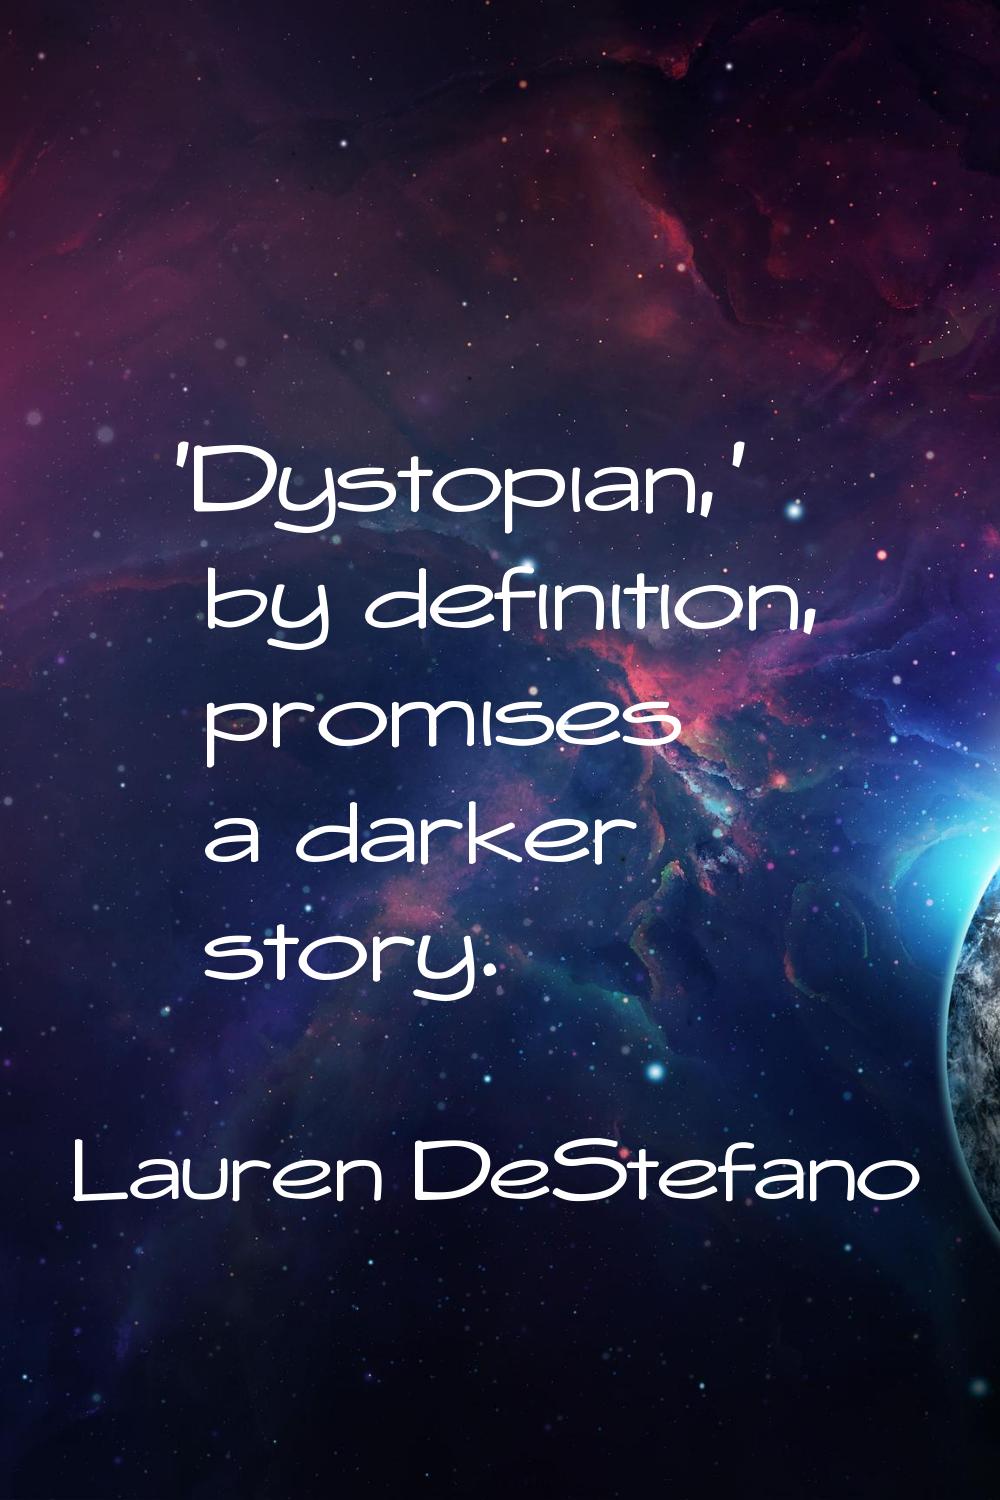 'Dystopian,' by definition, promises a darker story.